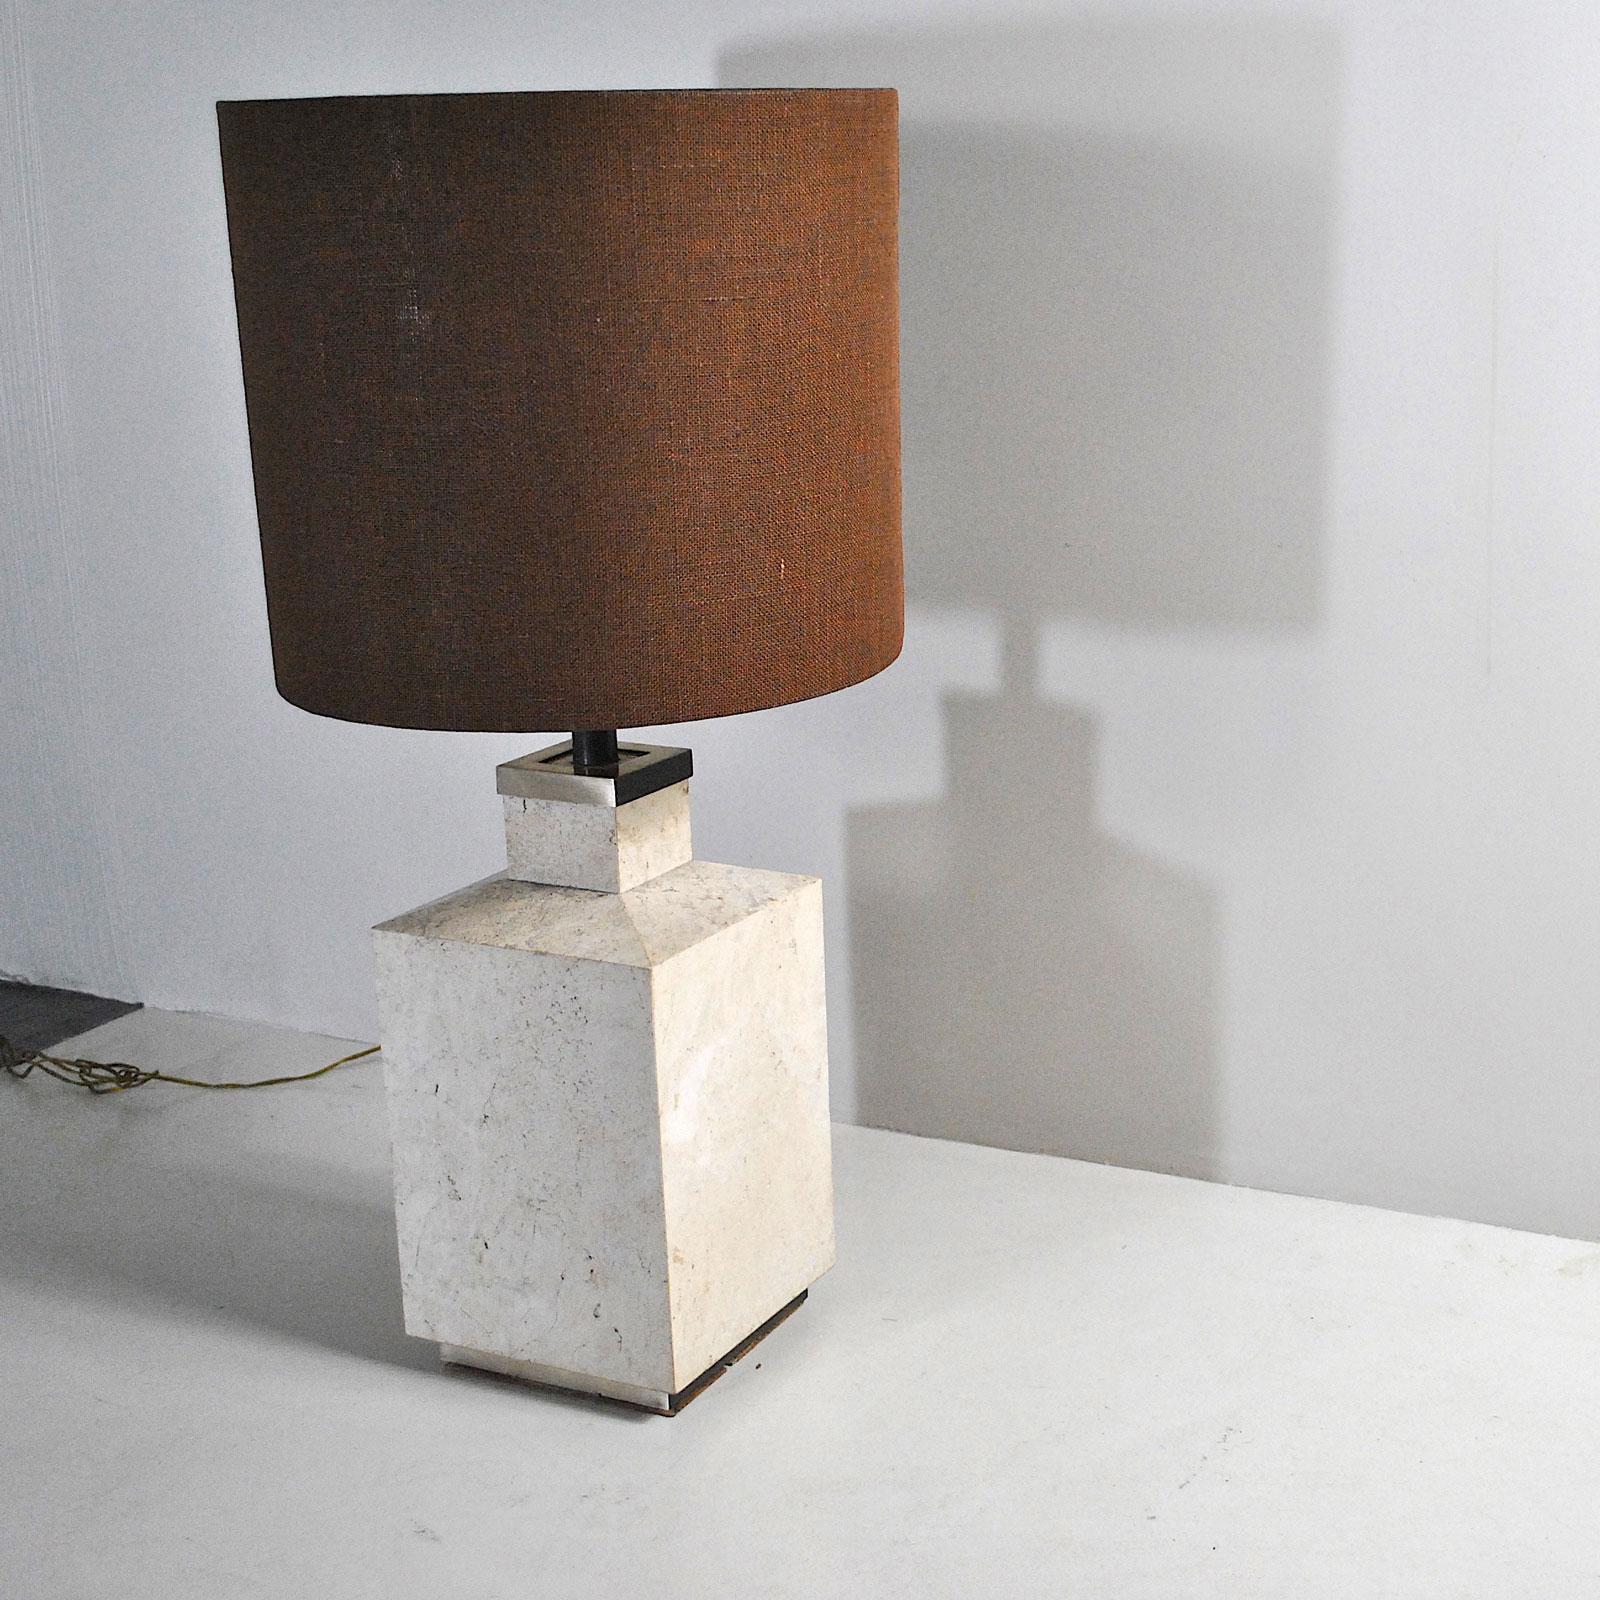 Late 20th Century Italian Midcentury Table Lamp Form the 1970s For Sale